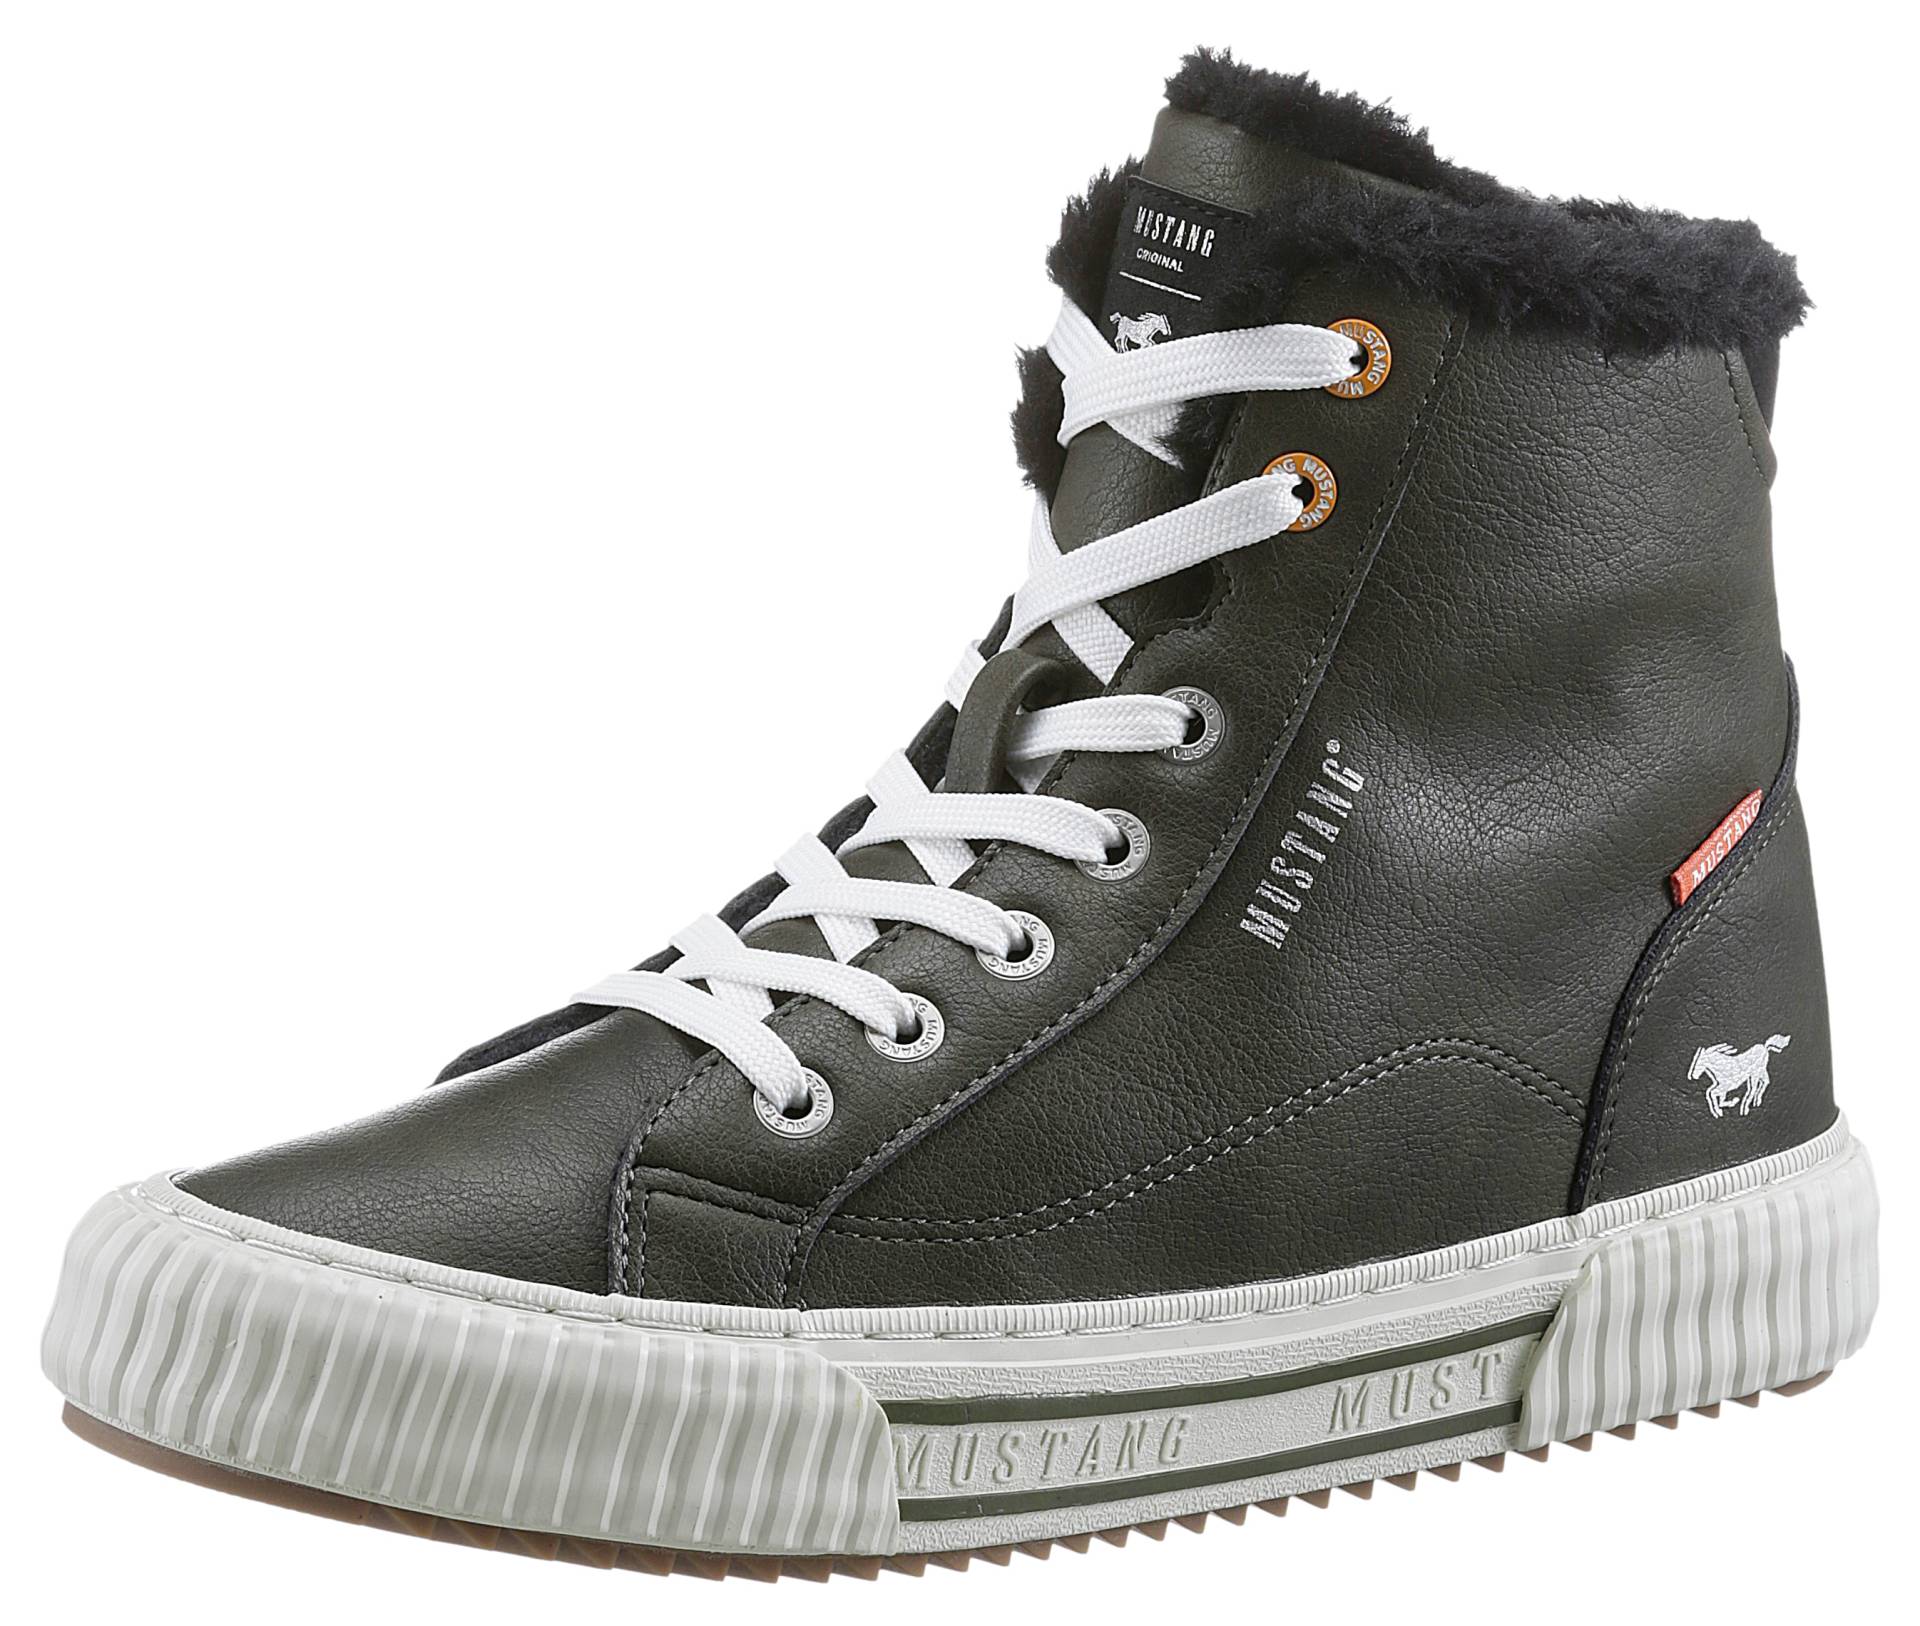 Mustang Shoes Winterboots, mit Plateausohle von mustang shoes